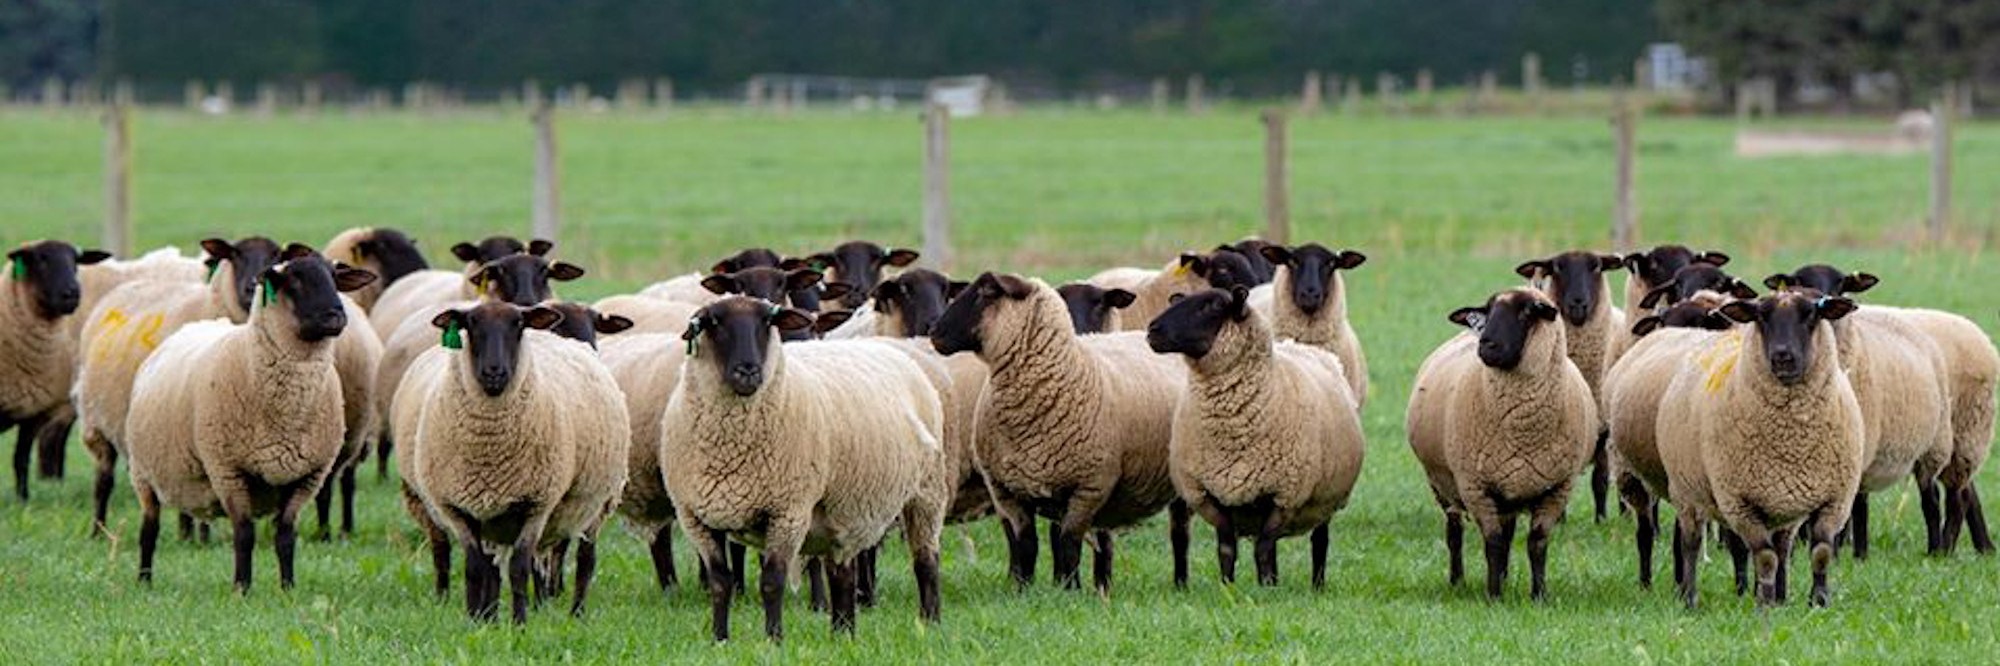 A group of sheep stand in a field